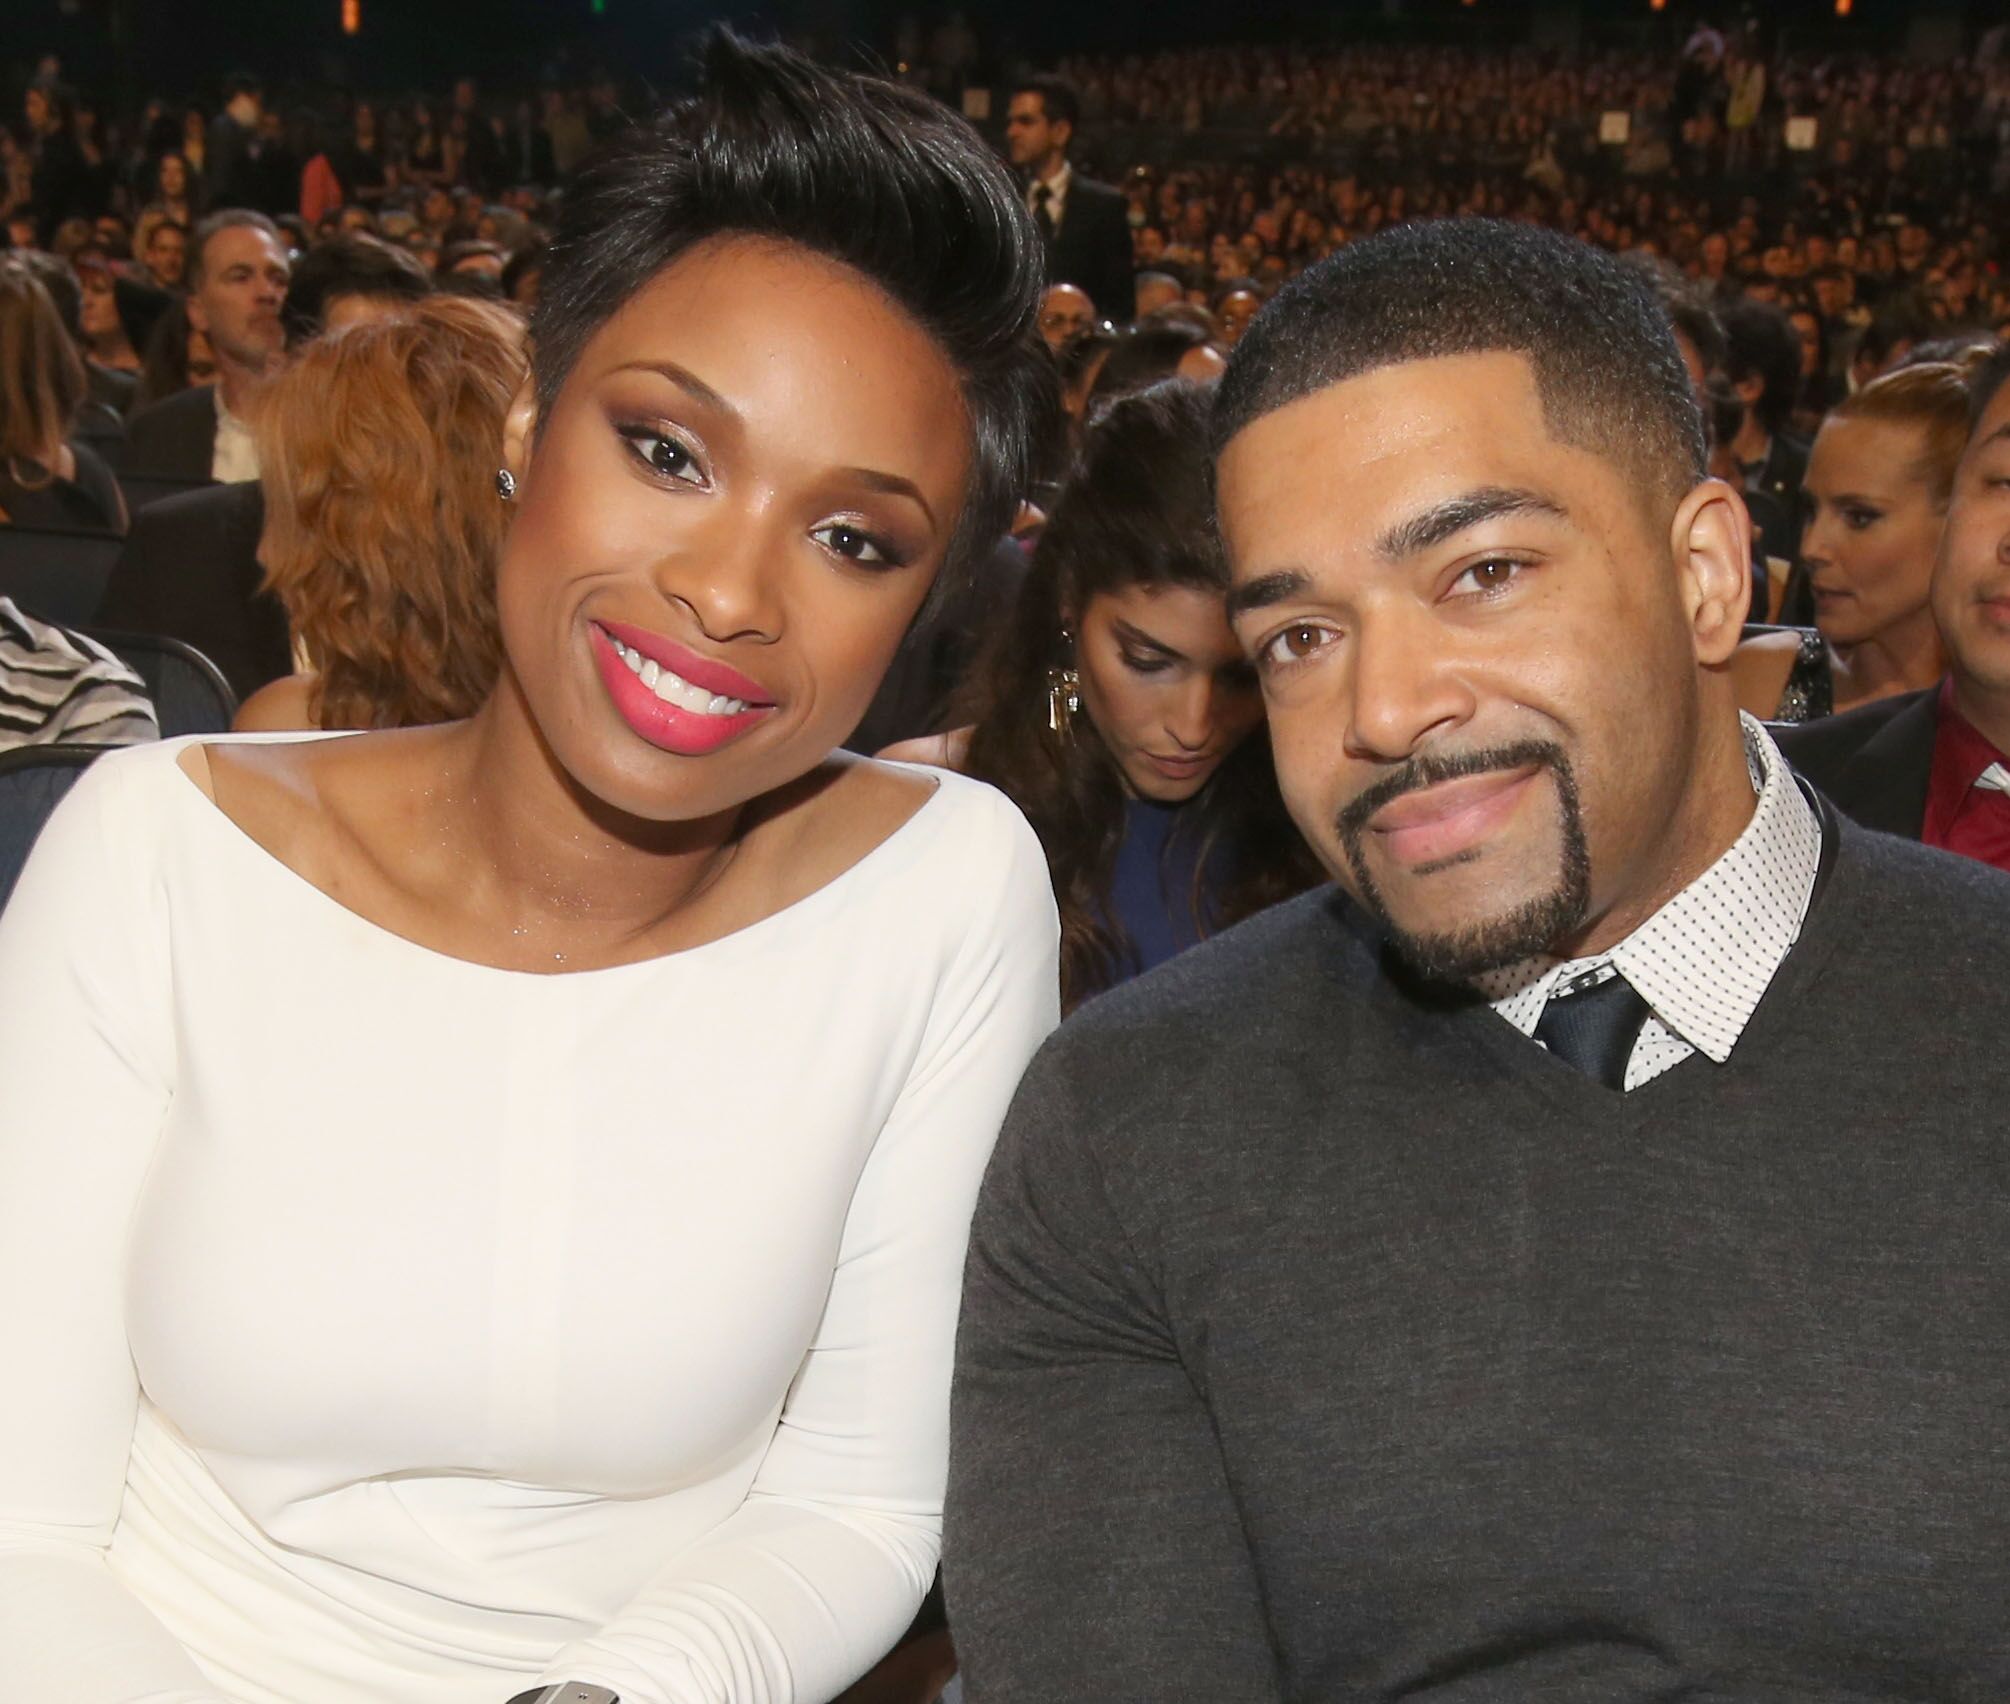 Jennifer Hudson (L) and David Otunga attend The 40th Annual People's Choice Awards at Nokia Theatre L.A. Live on January 8, 2014 in Los Angeles, California. | Source: Getty Images